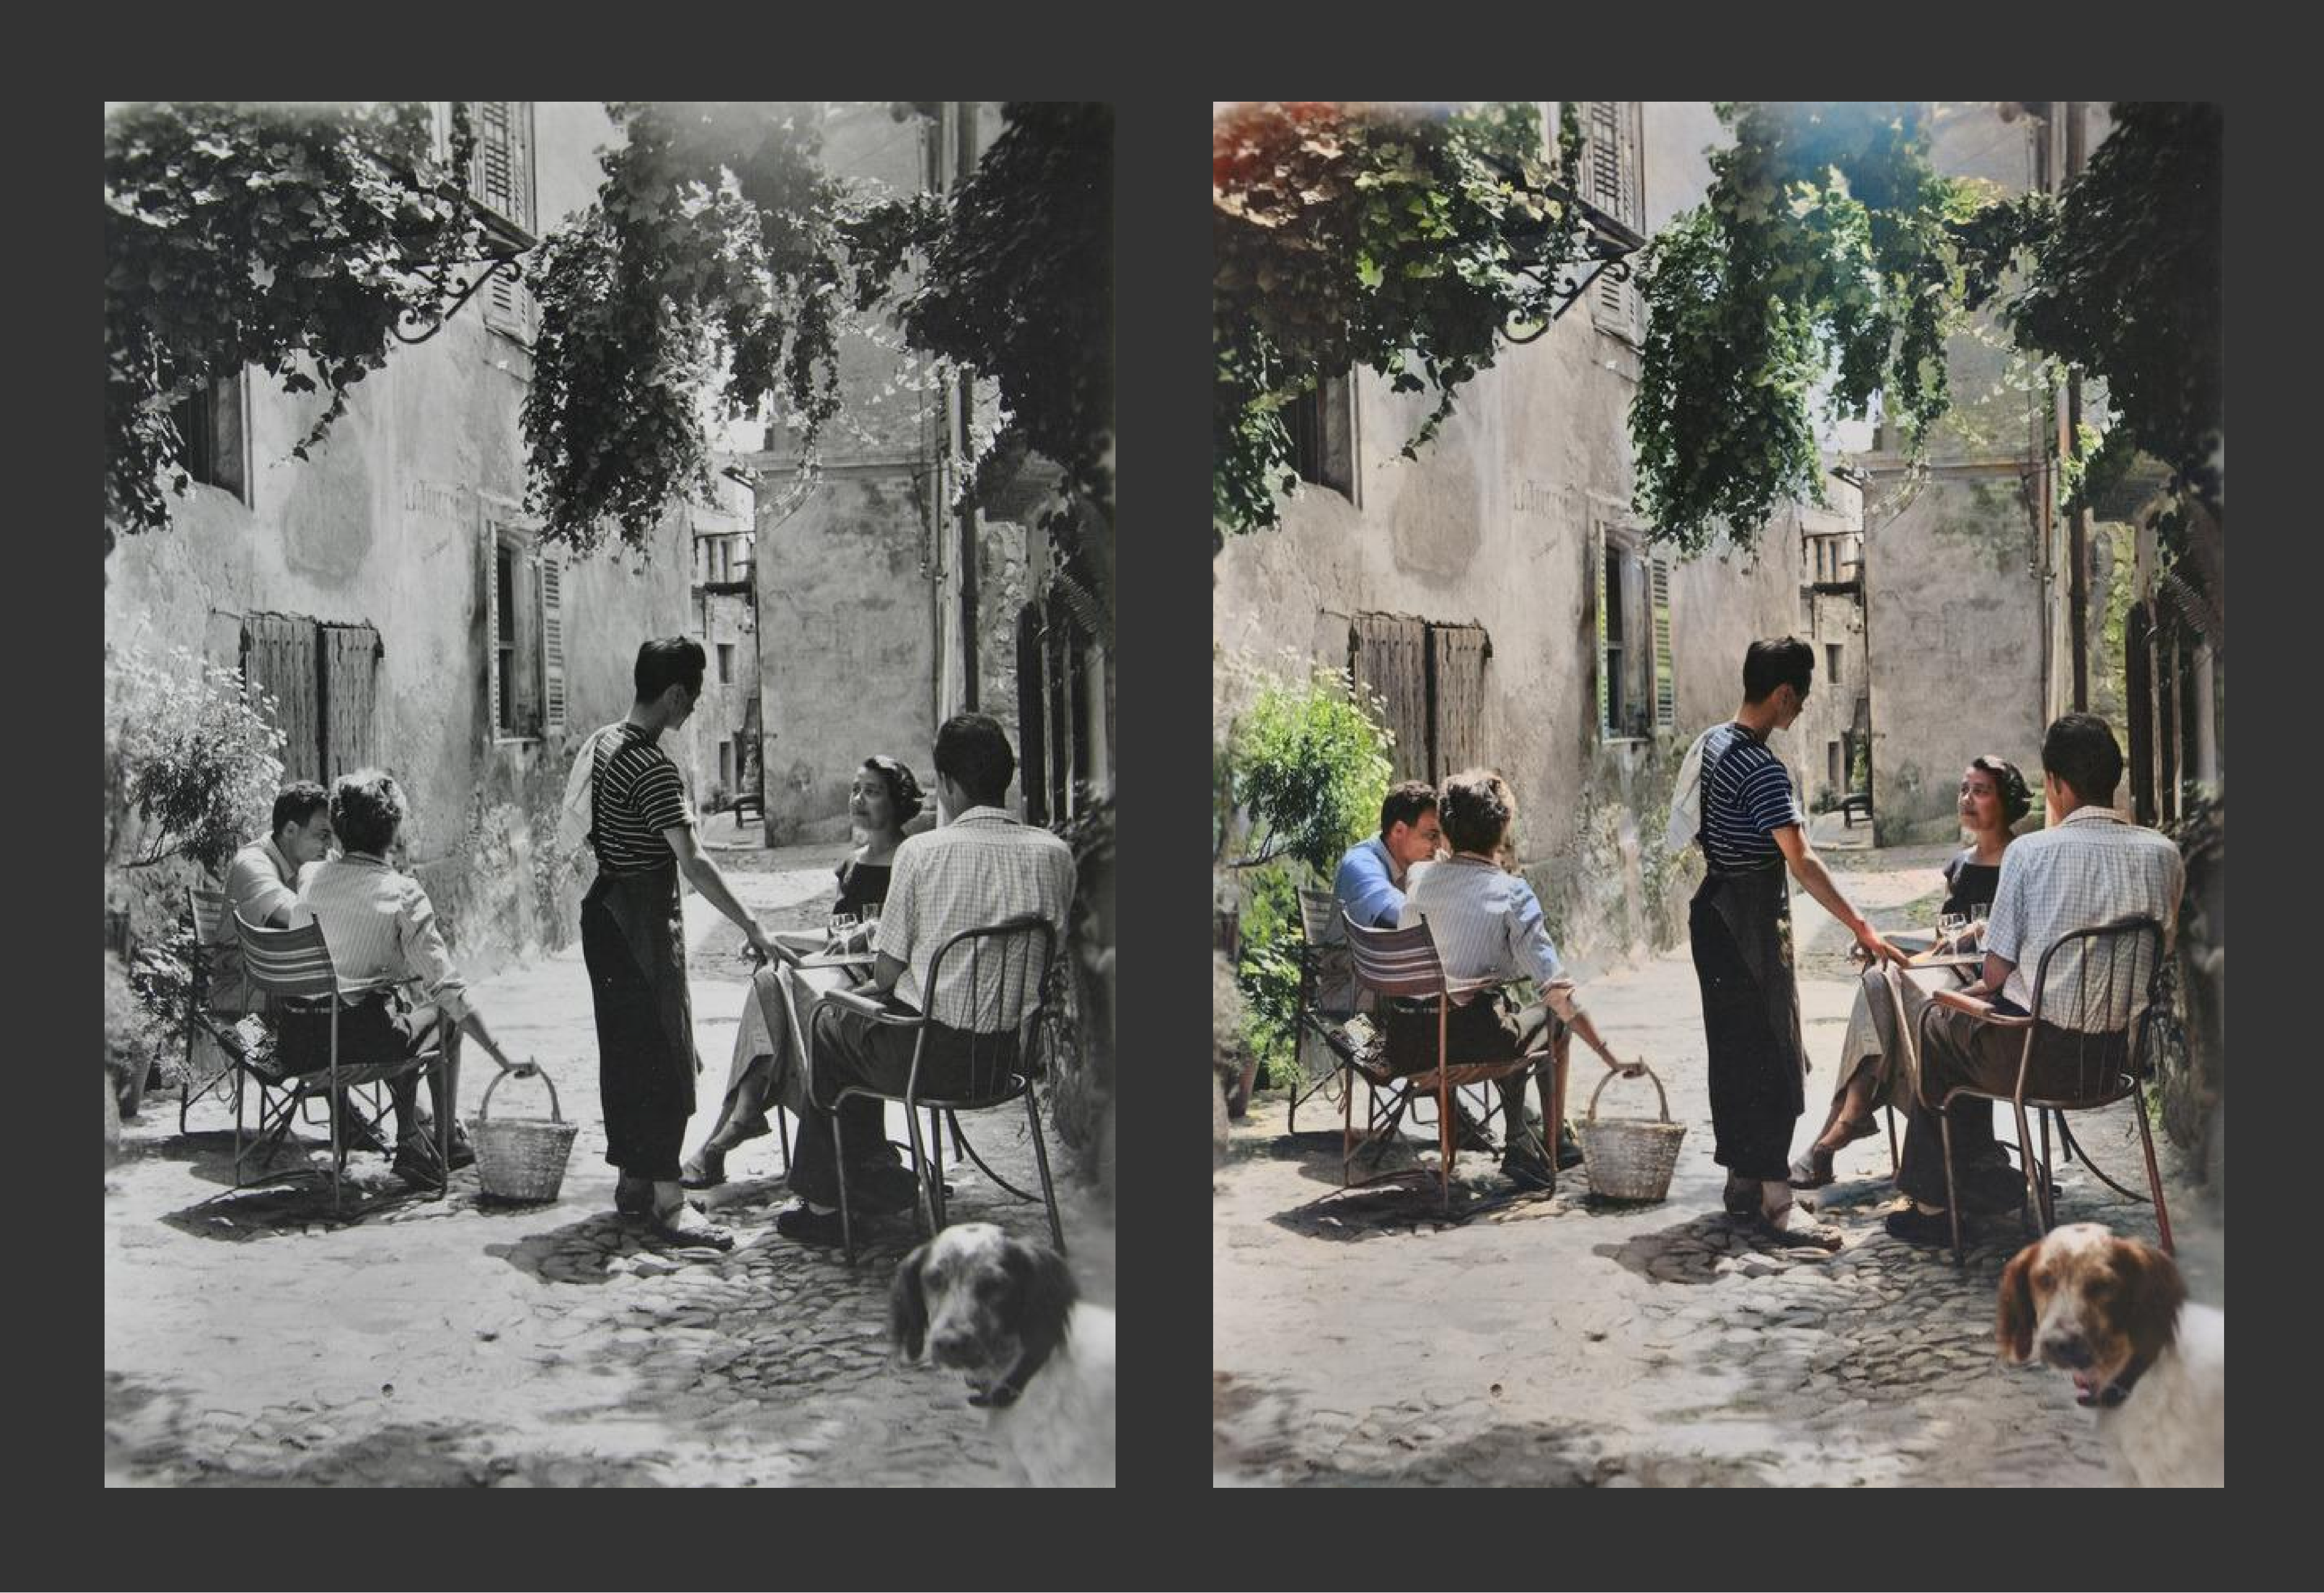 Jason Antic created a PyTorch-powered project called DeOldify (https://github.com/jantic/DeOldify) that uses deep learning for colorizing and restoration of old images.